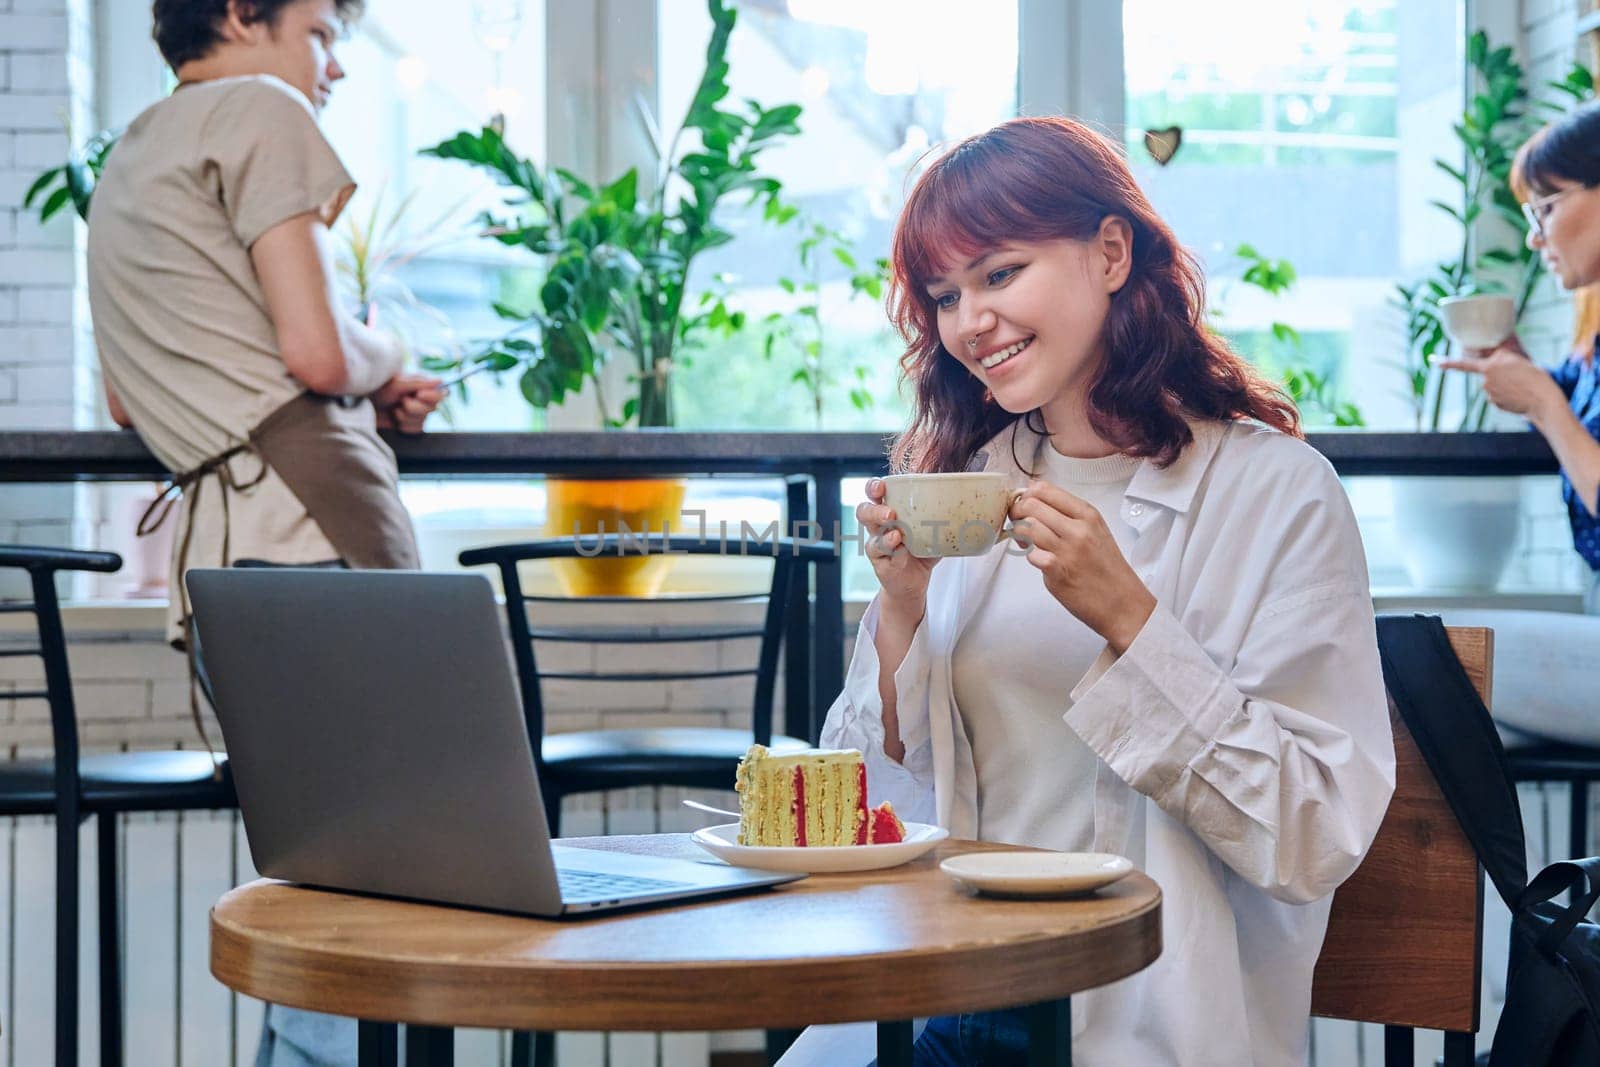 Female college student with laptop in cafe at table with cup of coffee and piece of cake. Internet online technology for leisure communication blogging learning chat, youth lifestyle concept